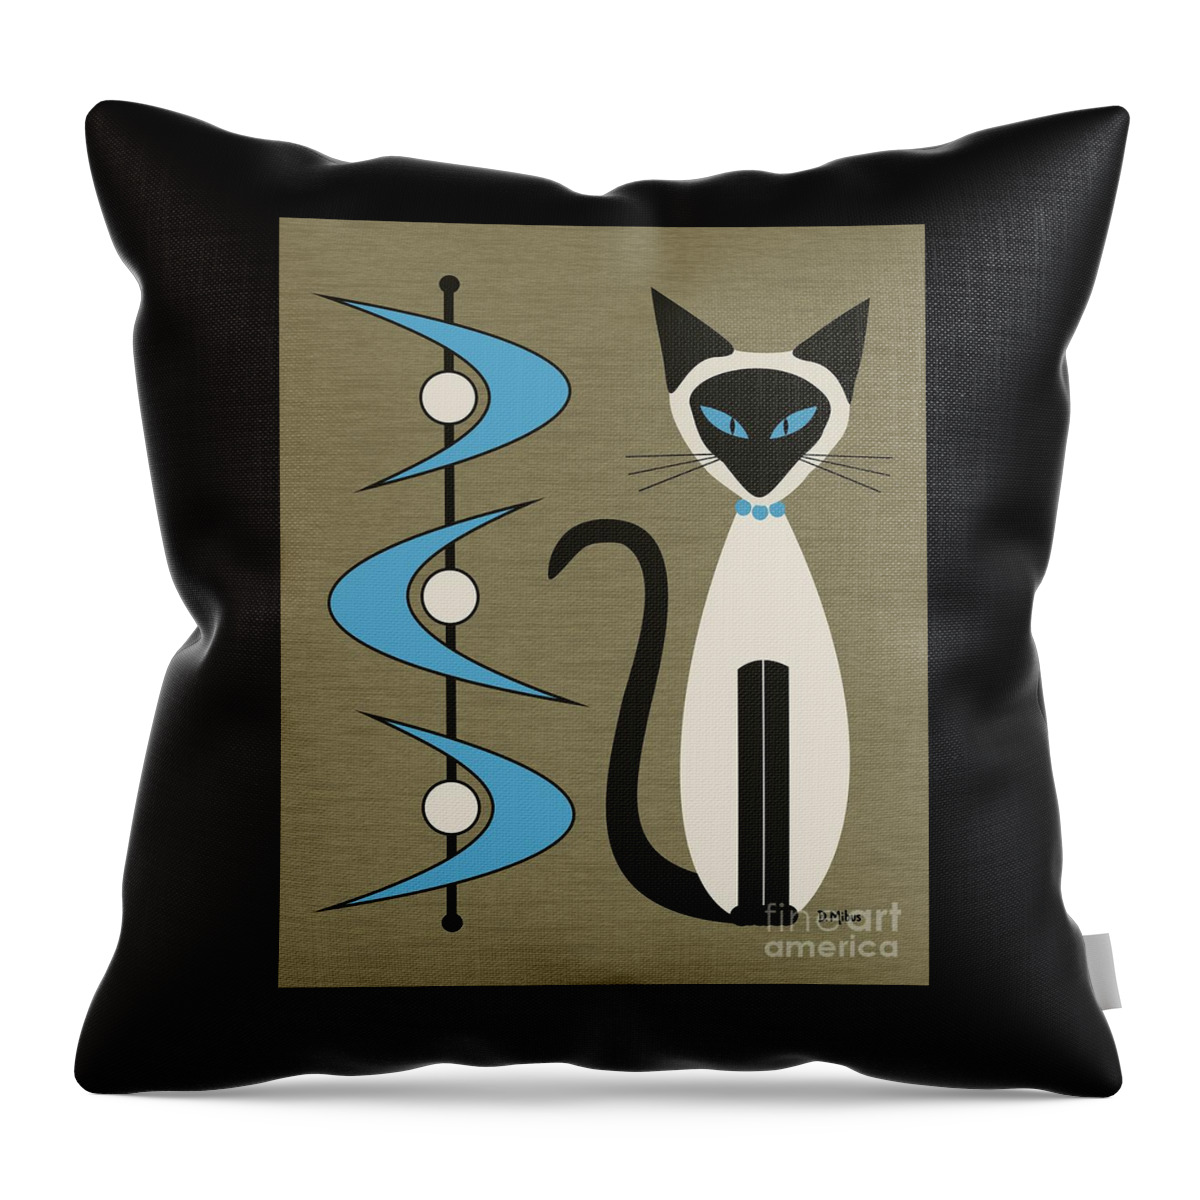 Mid Century Modern Throw Pillow featuring the digital art Mid Century Siamese with Boomerangs by Donna Mibus